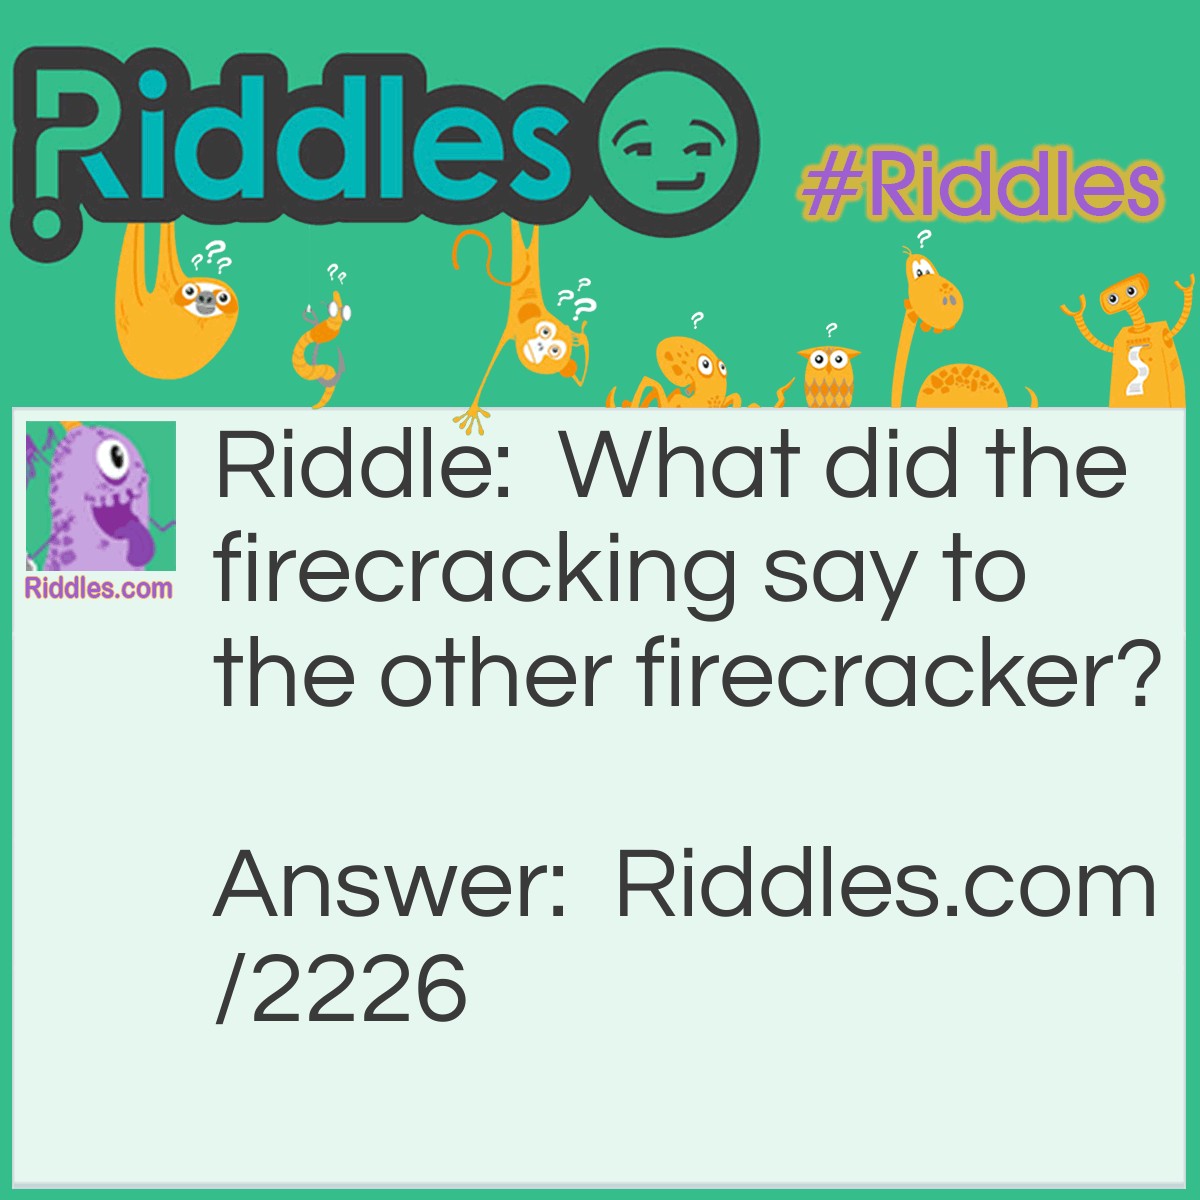 Riddle: What did the firecracker say to the other firecracker? Answer: "My pop is bigger than your pop".